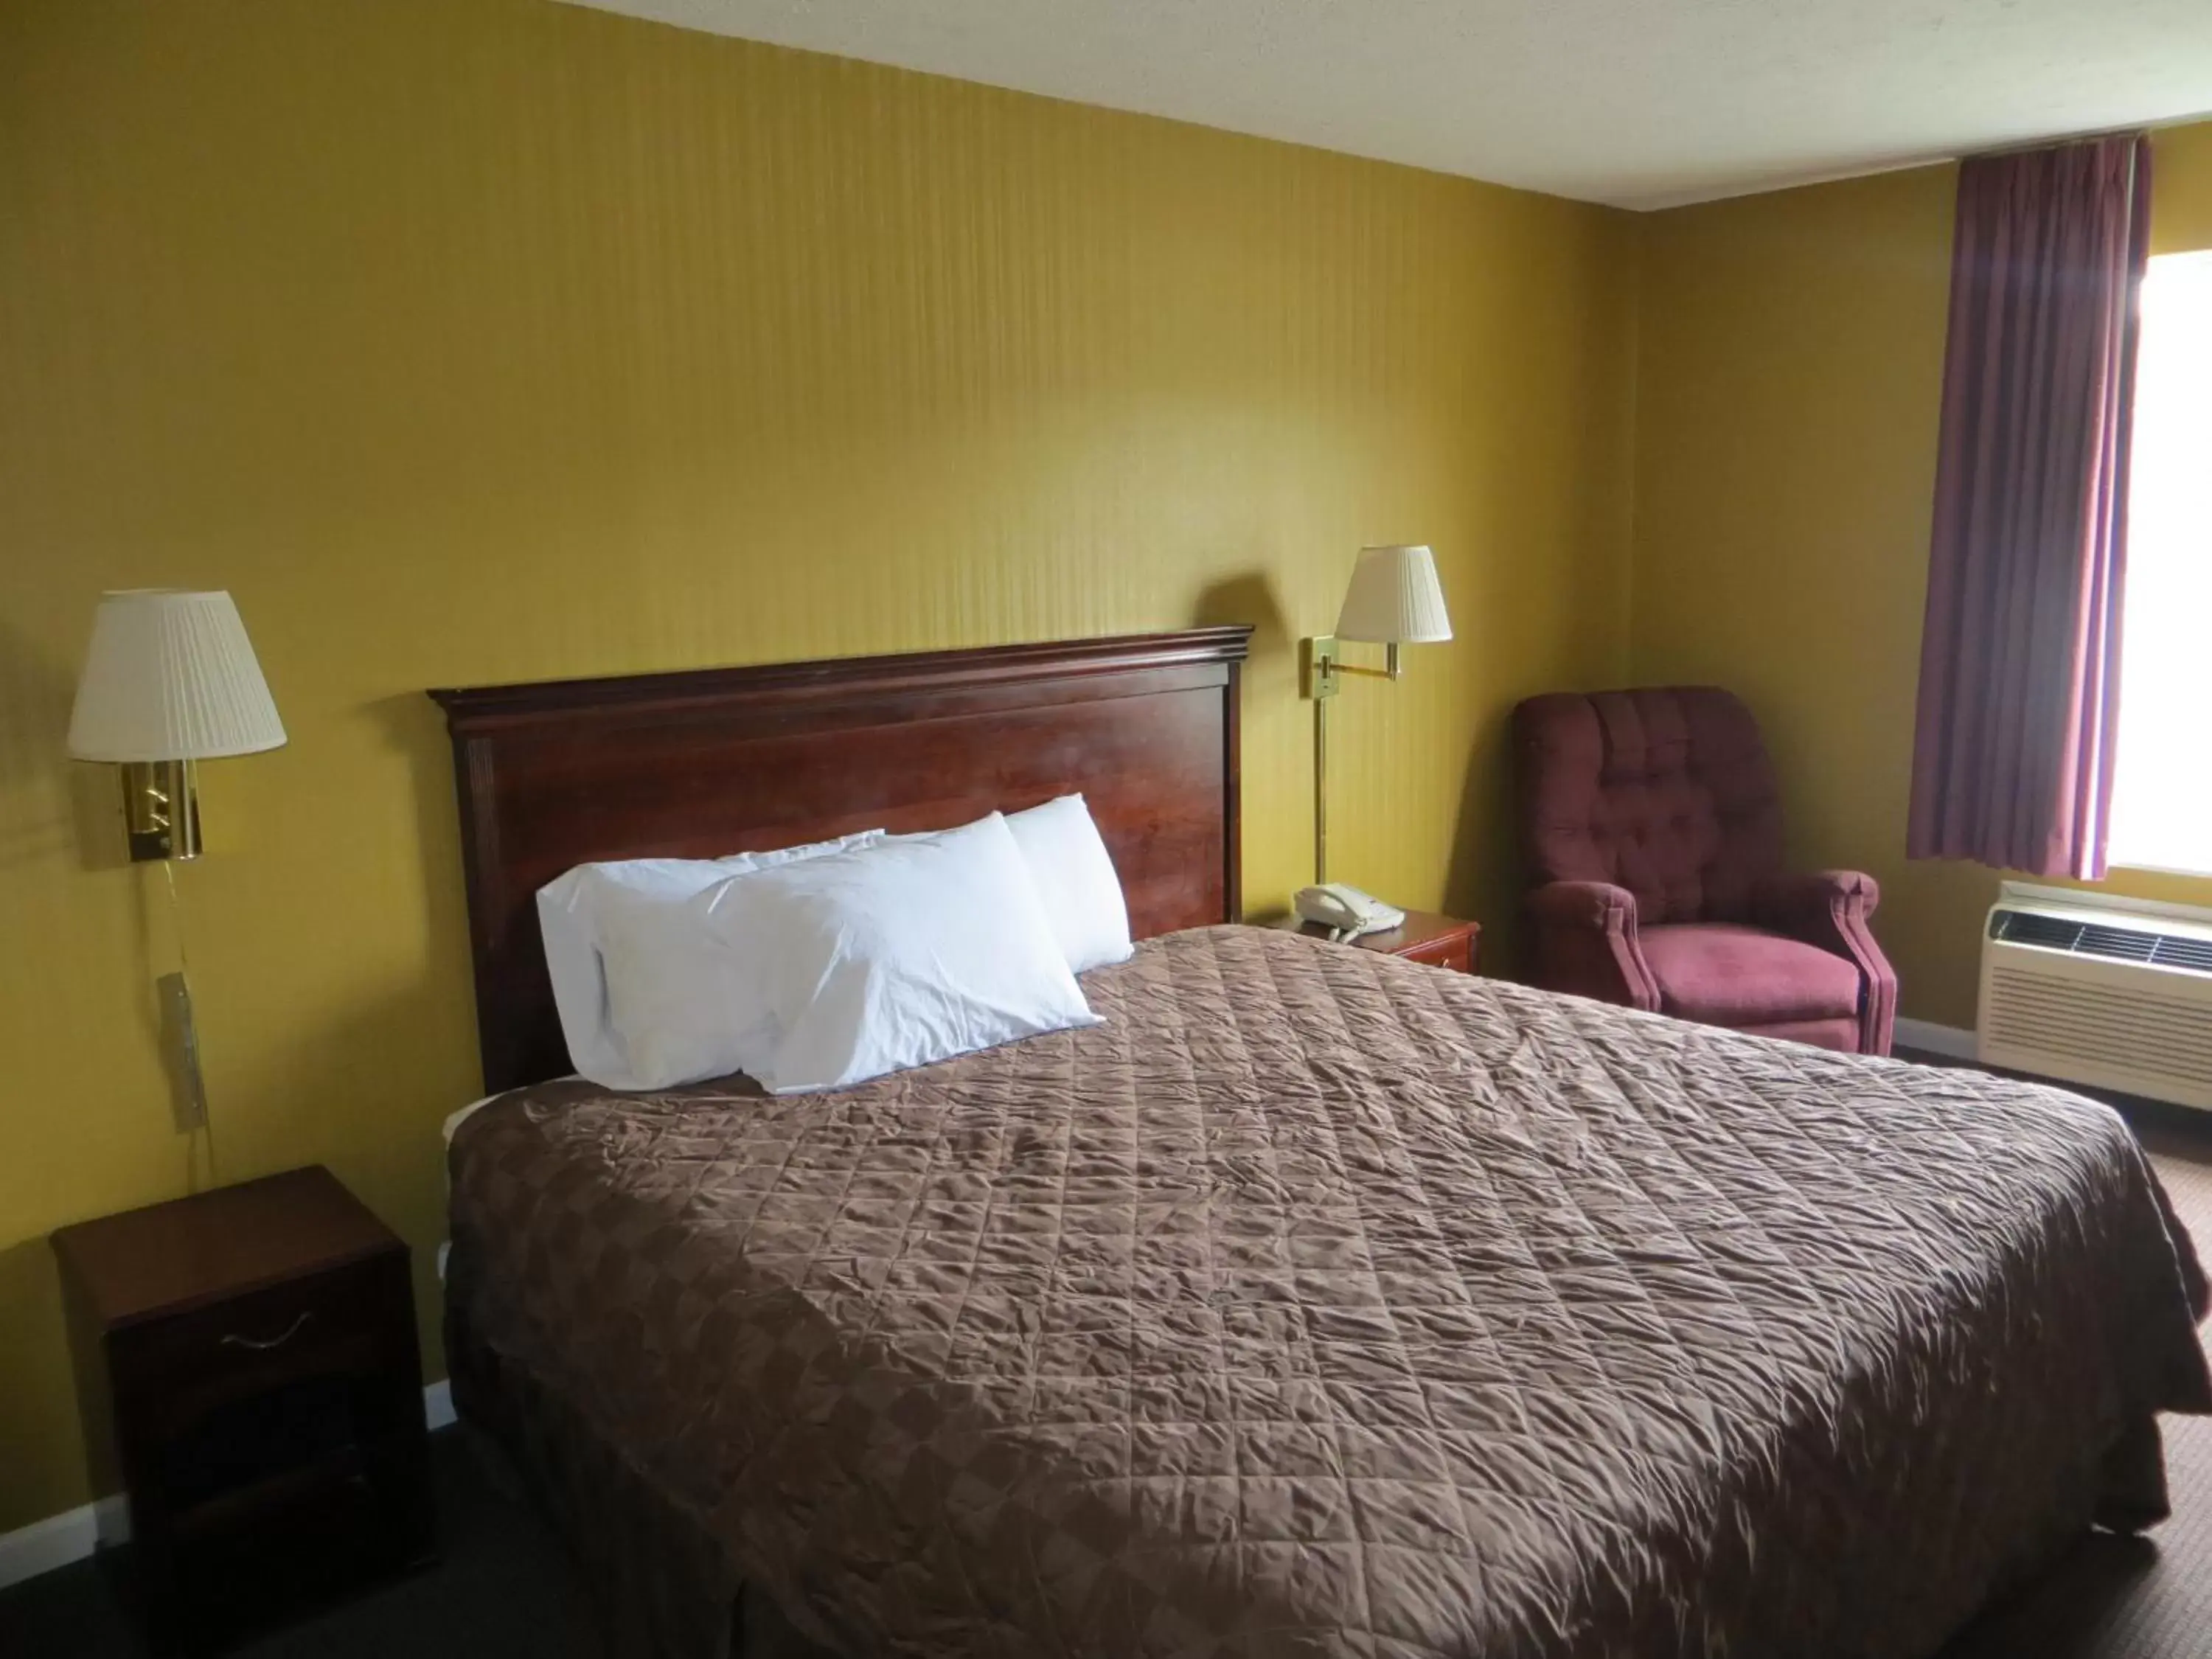 Bed in Americourt Hotel and Suites - Elizabethton